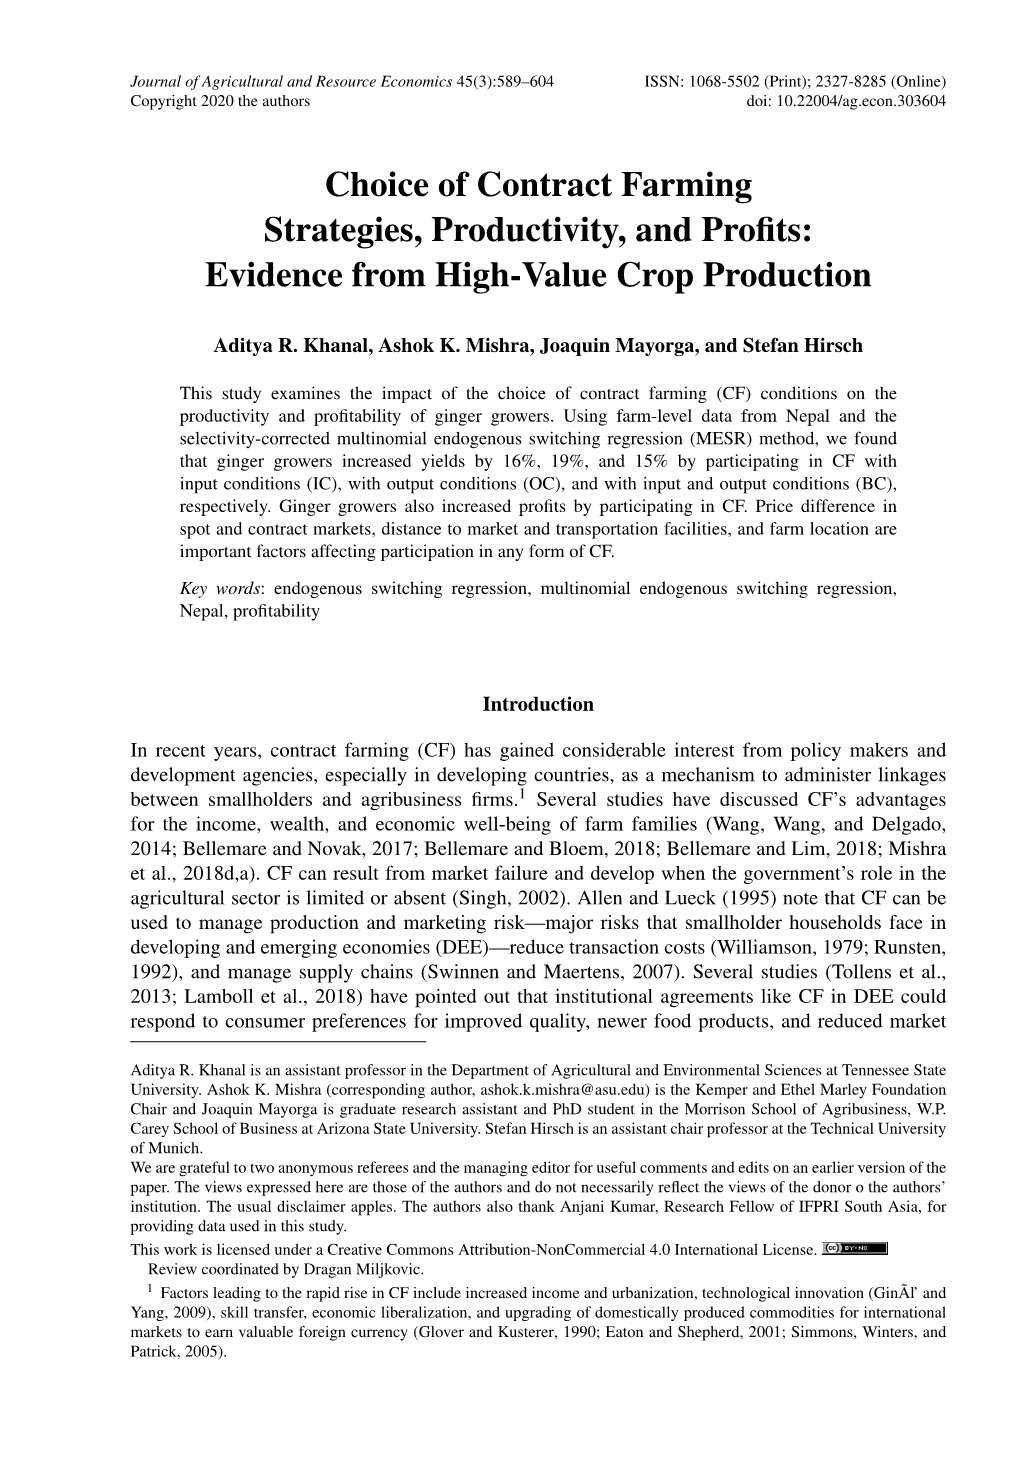 Choice of Contract Farming Strategies, Productivity, and Proﬁts: Evidence from High-Value Crop Production